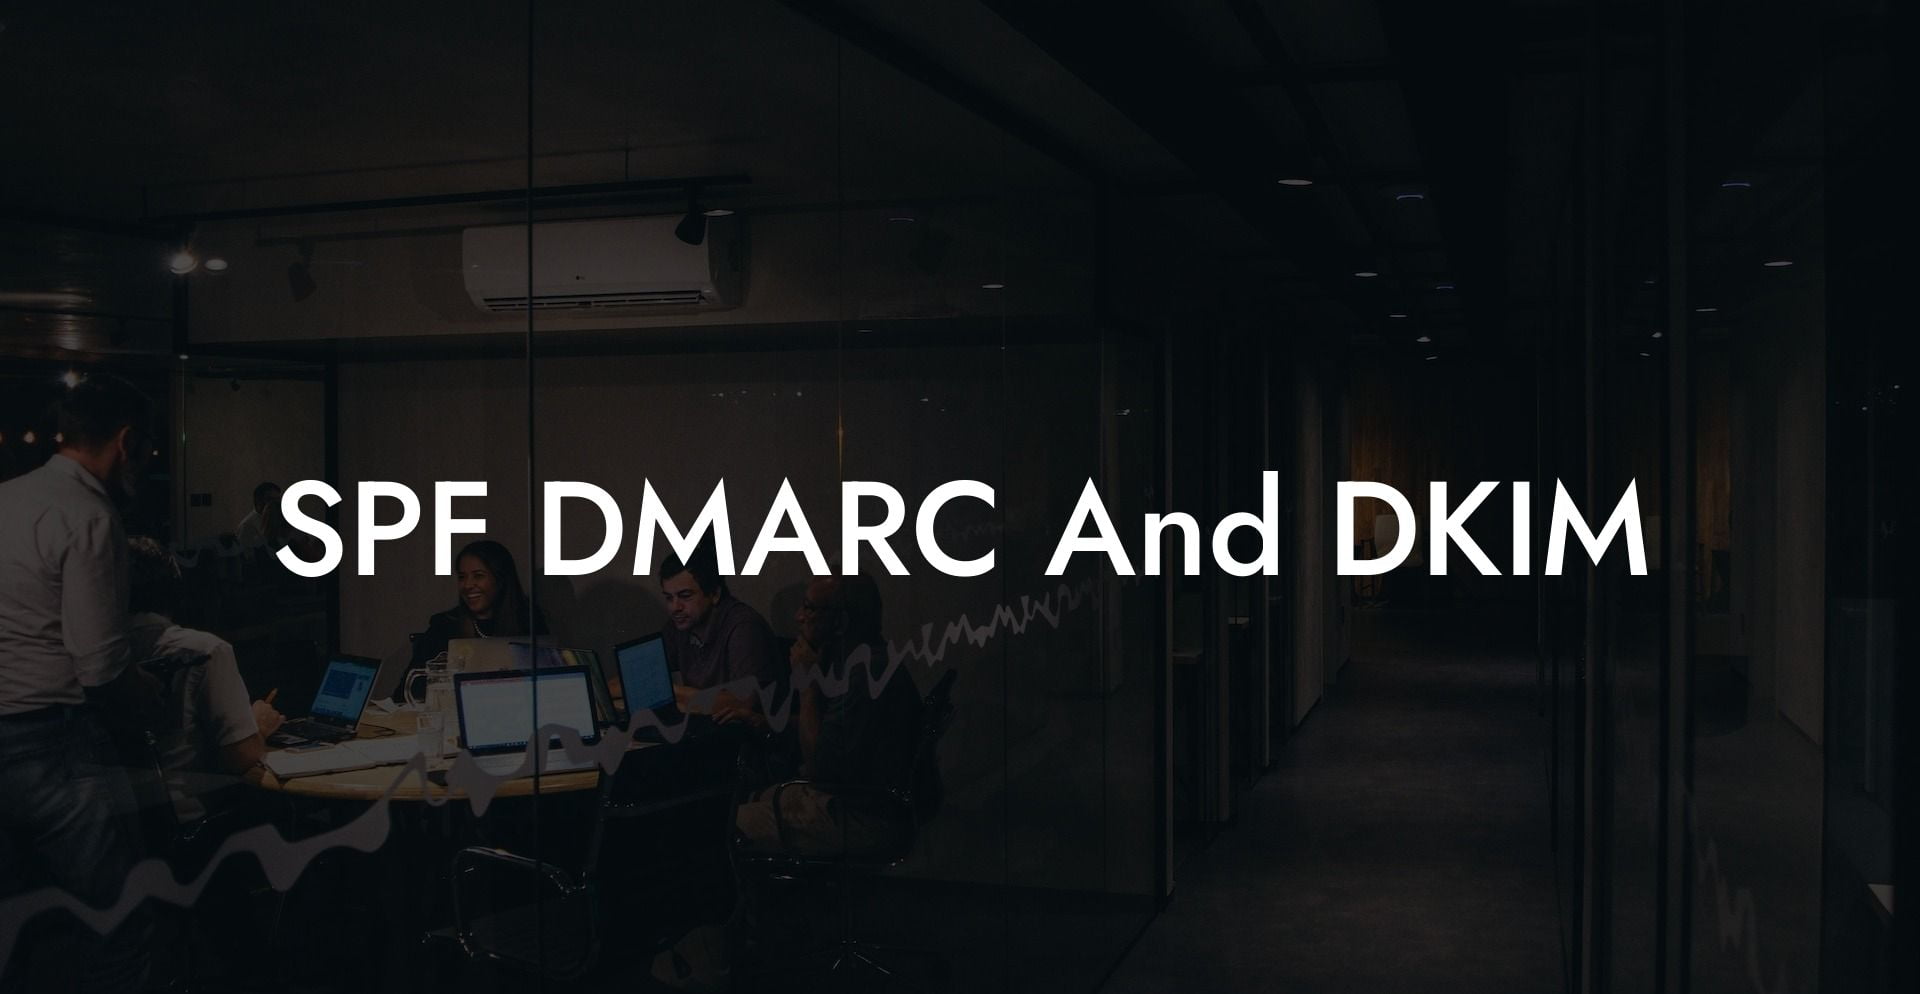 SPF DMARC And DKIM